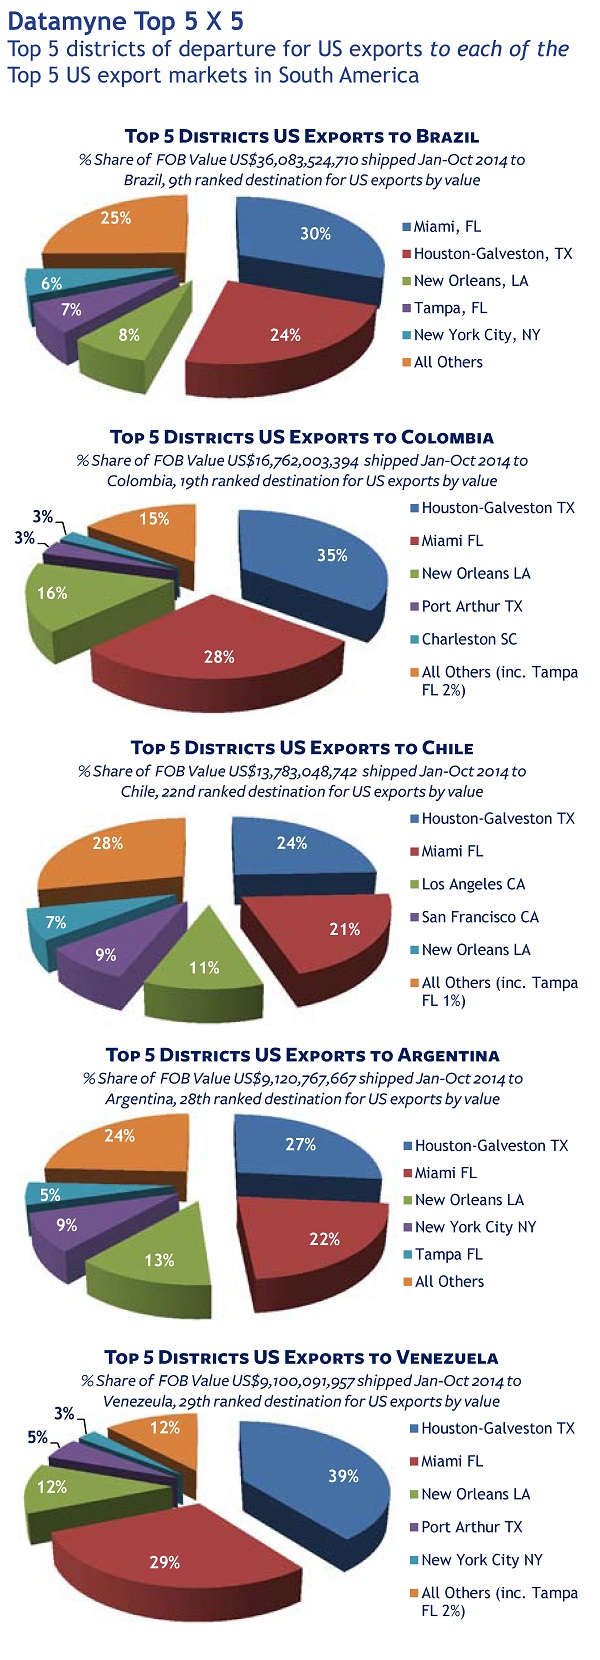 Datamyne Top 5X5 US Export Districts for South American Export Markets